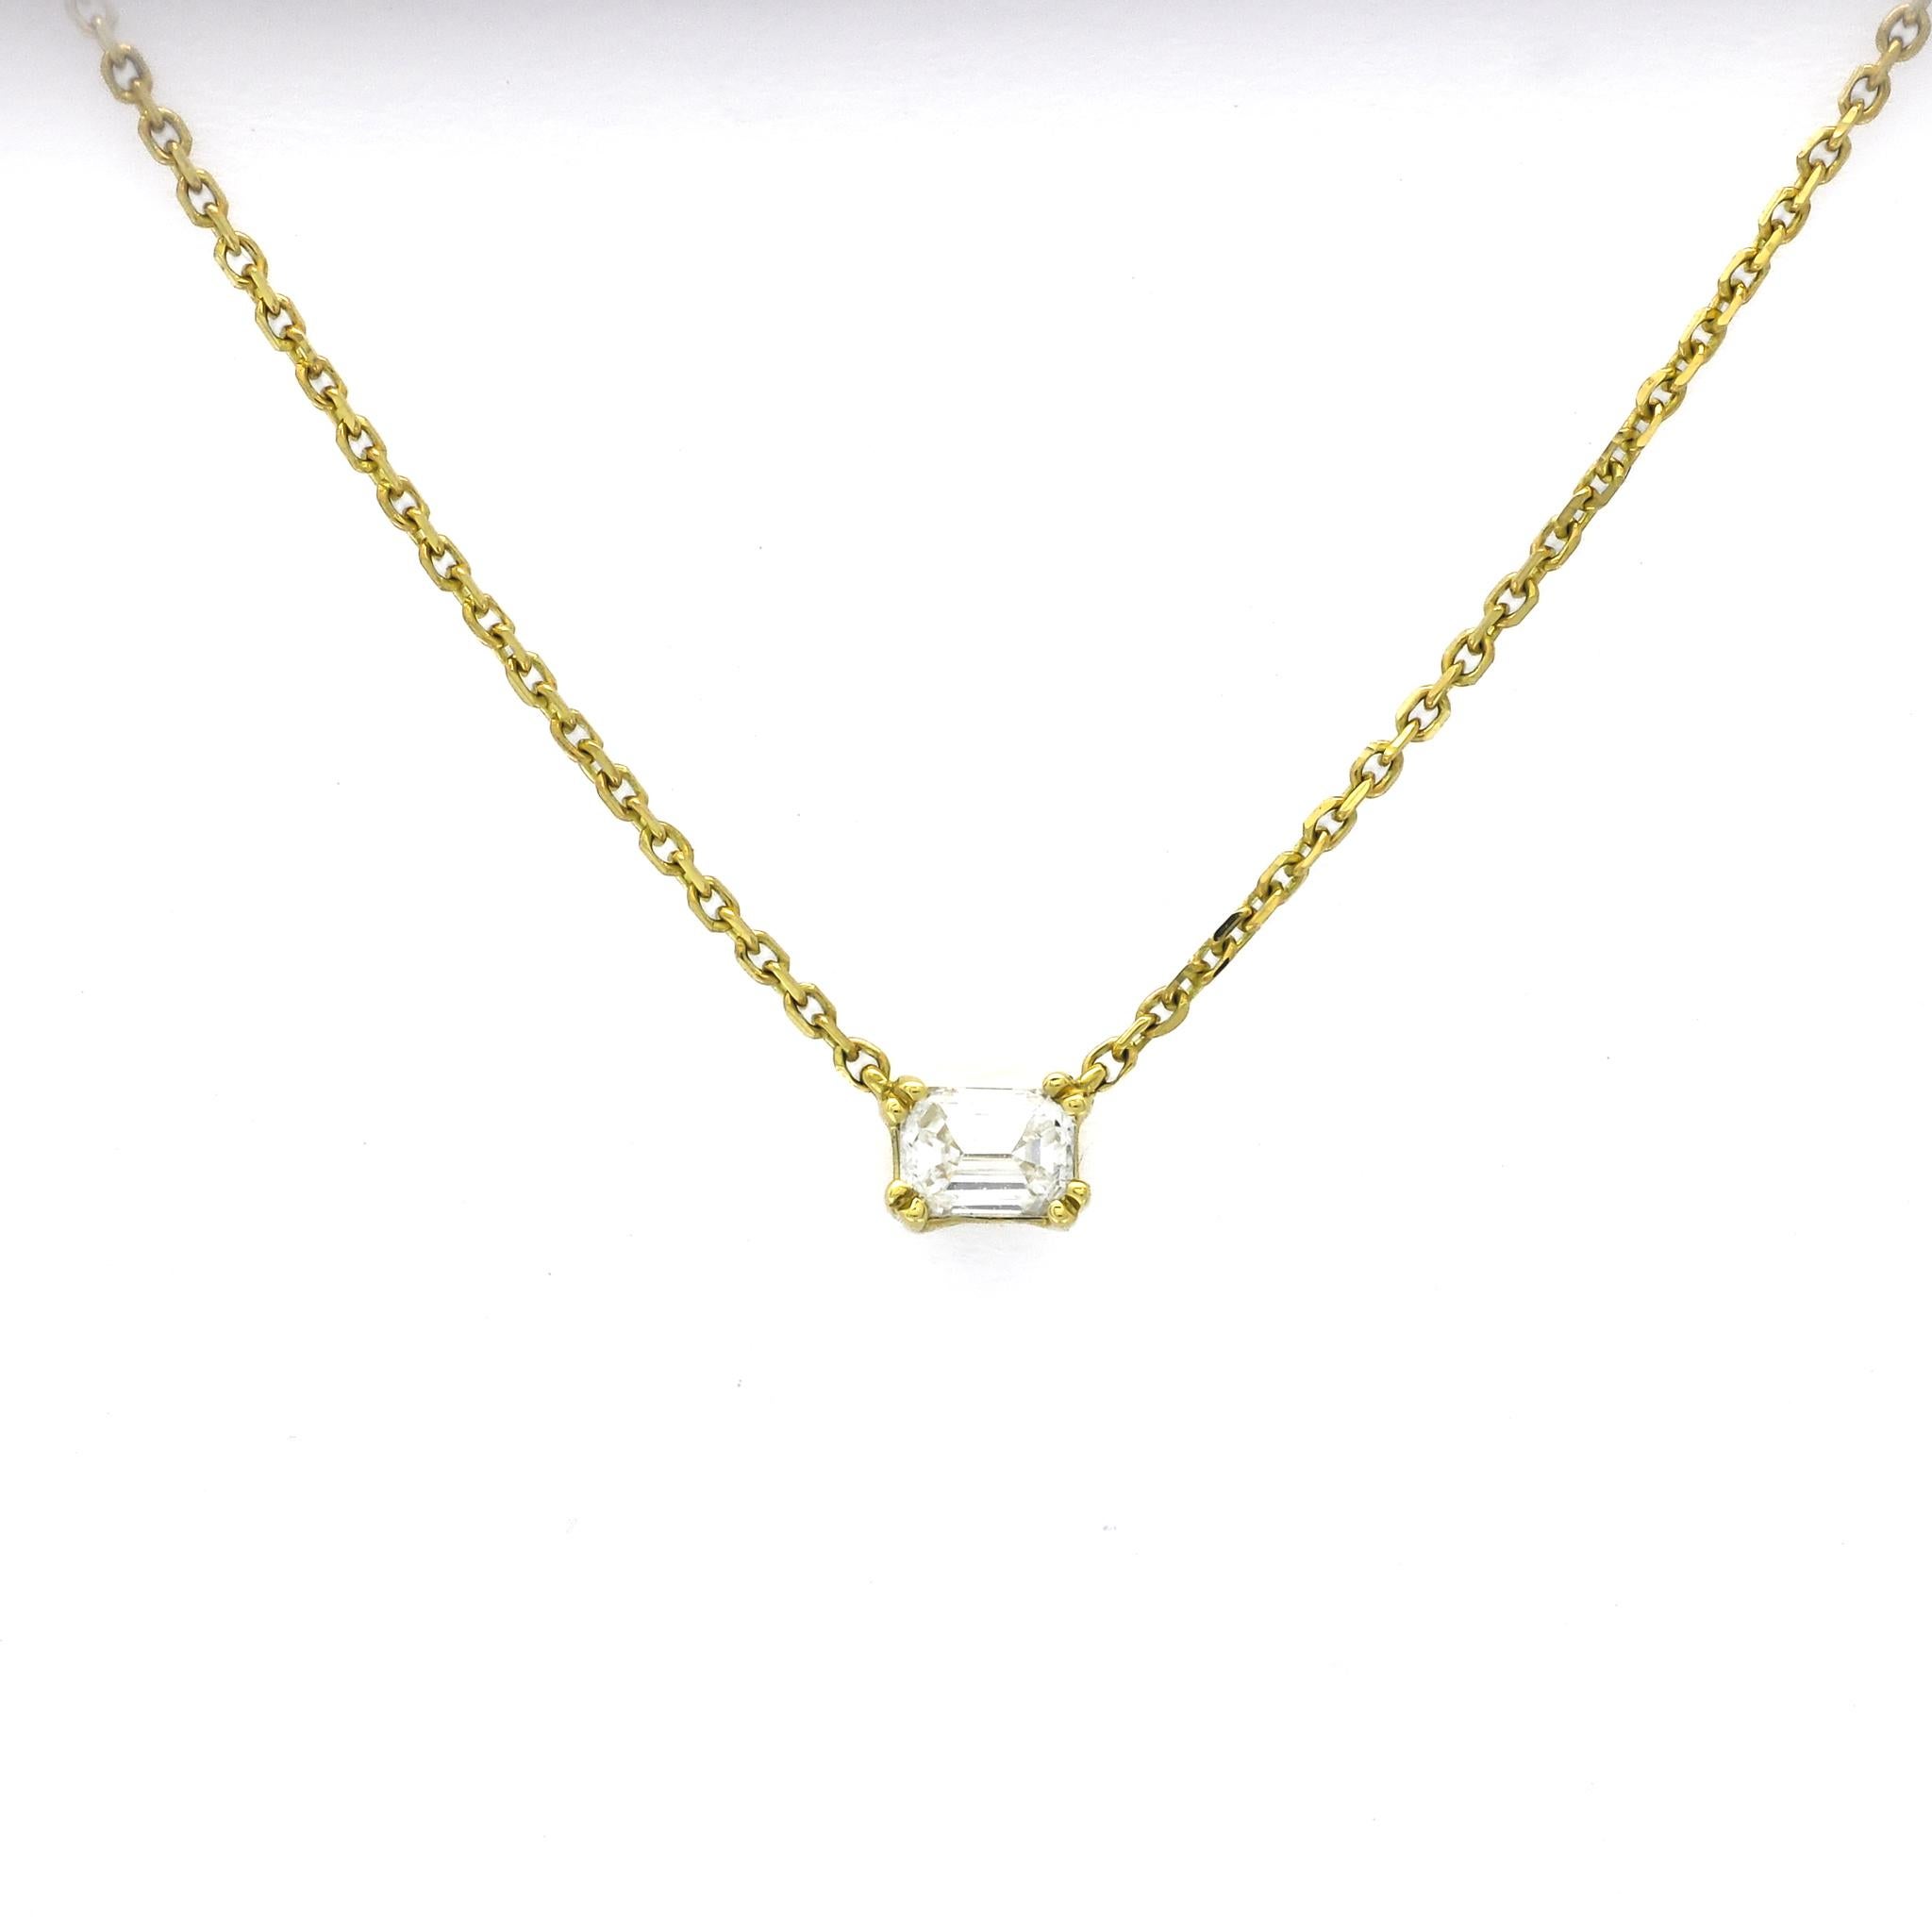 This exquisite piece of jewelry is a testament to the timeless allure of simplicity and elegance. Suspended from an 18-karat yellow gold chain, the focal point of this necklace is a mesmerizing emerald-cut natural diamond weighing 0.16 carats. The